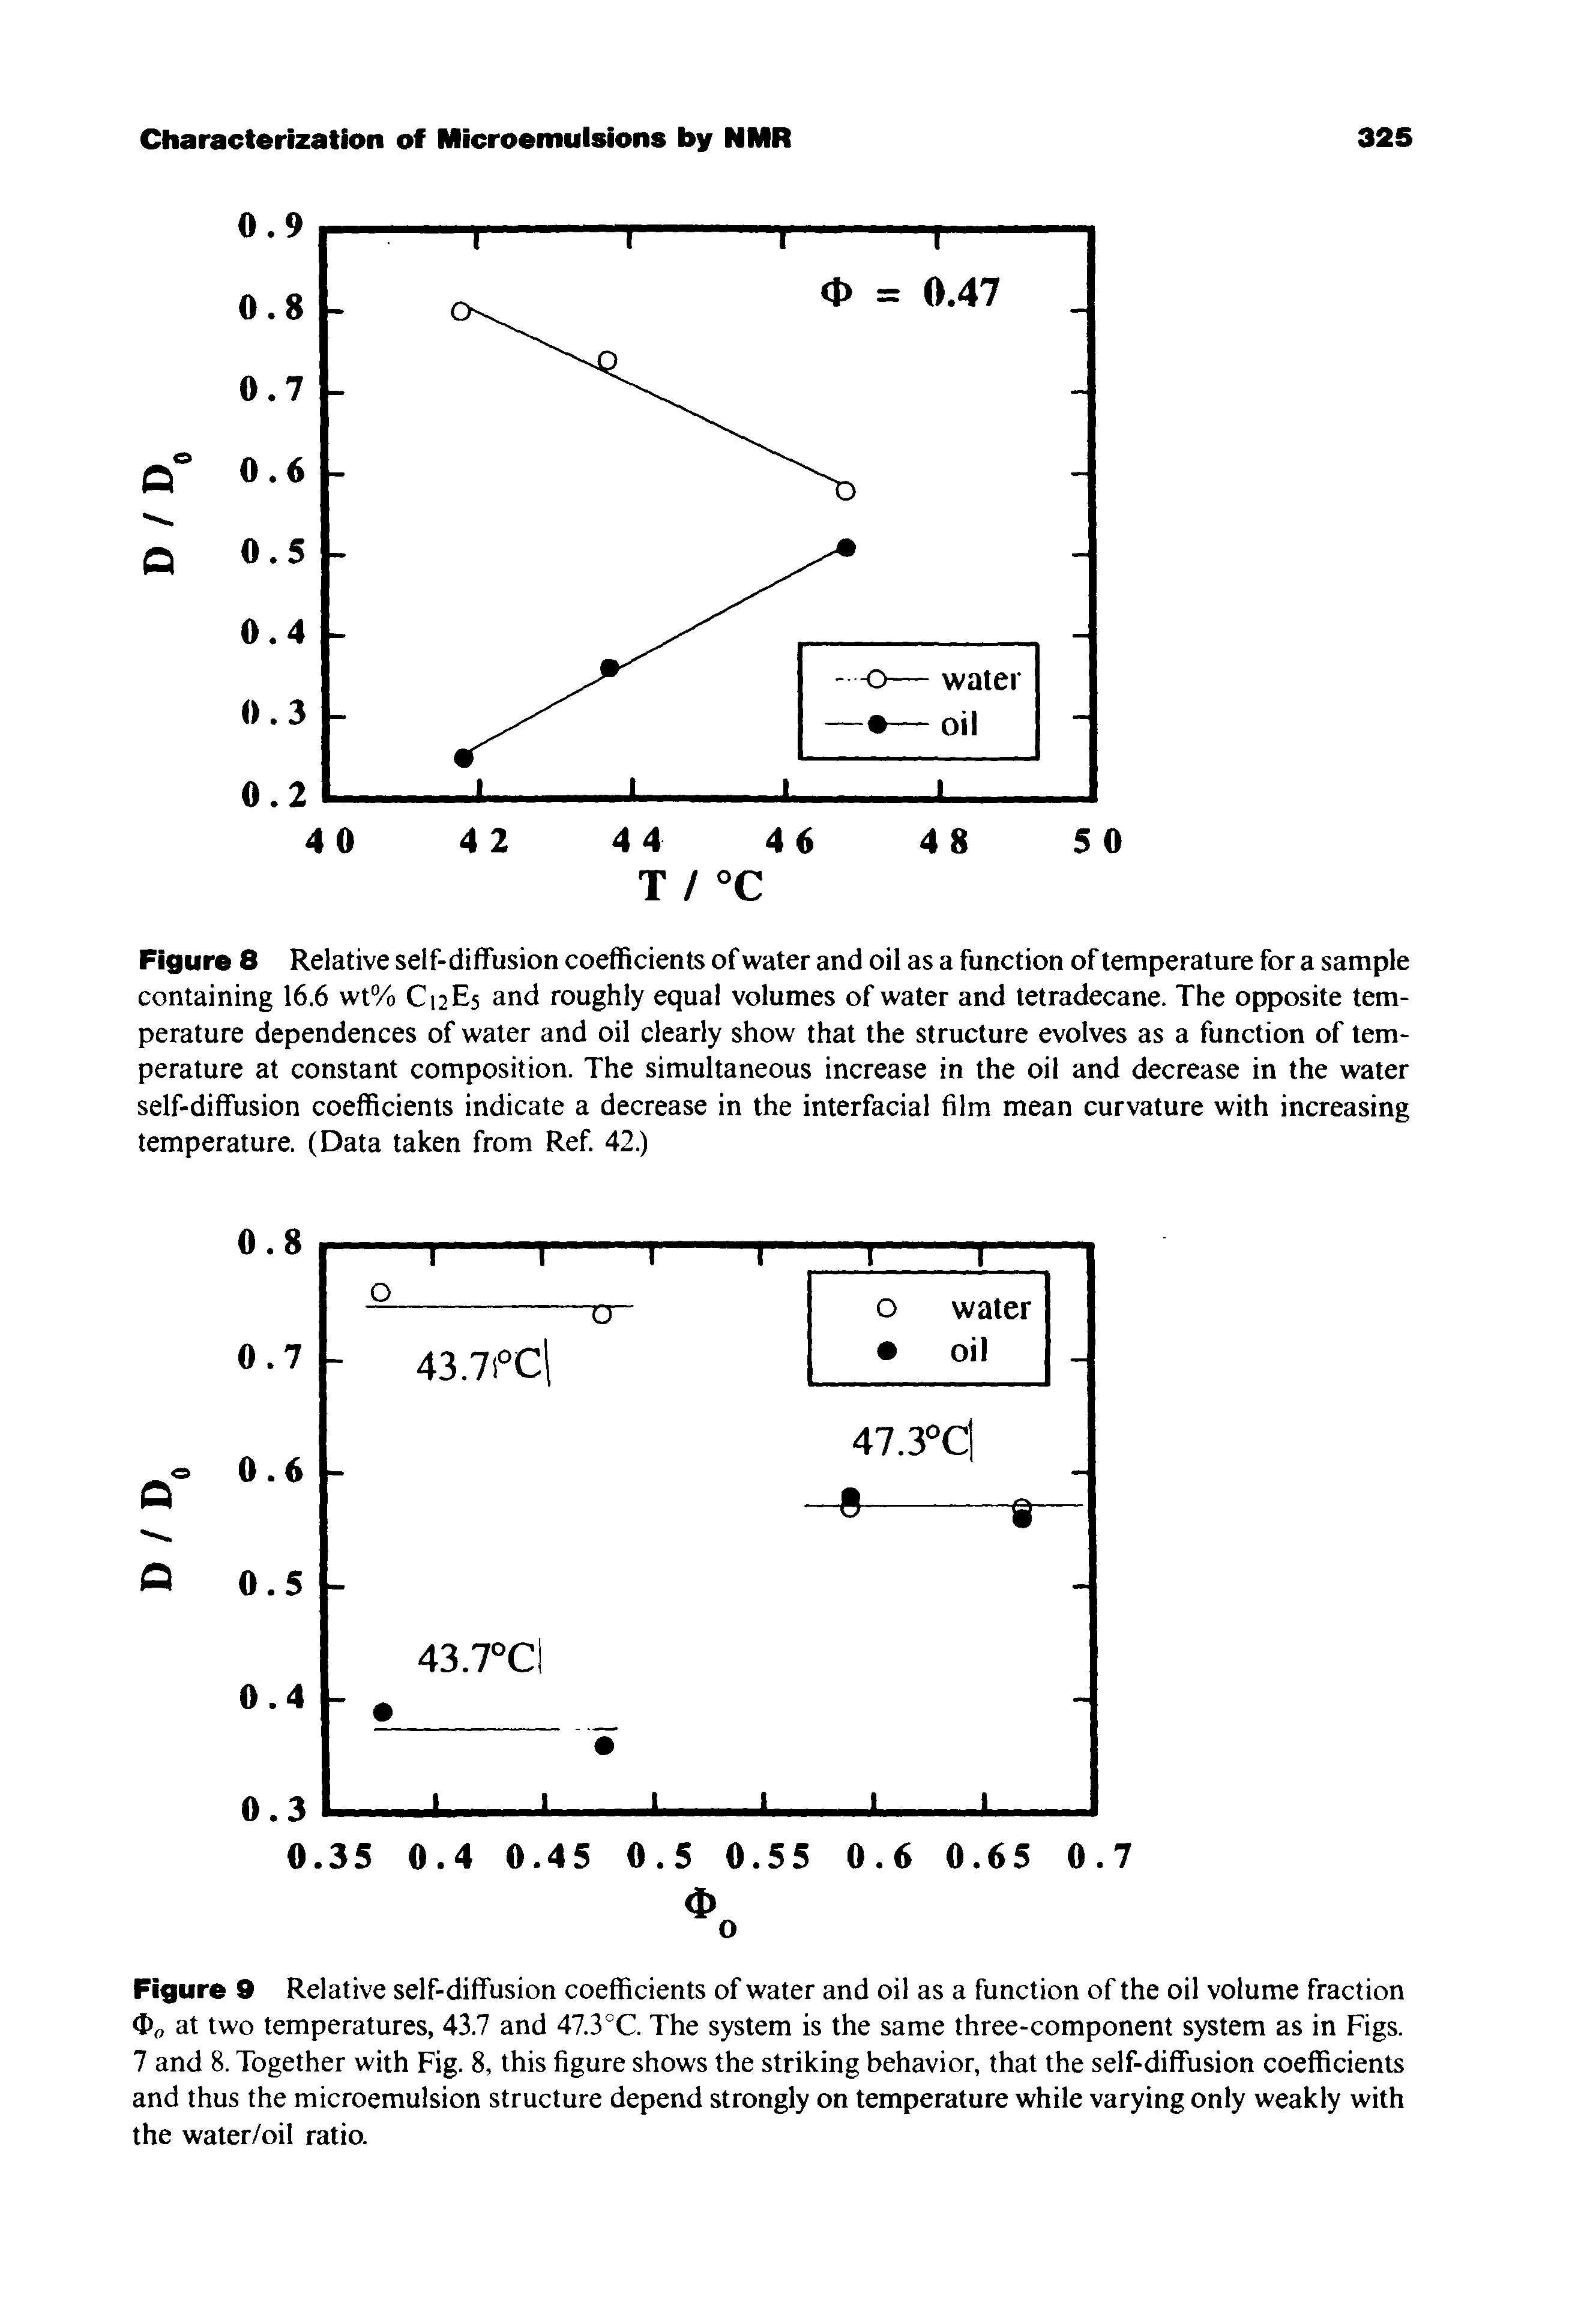 Figure 9 Relative self-diffusion coefficients of water and oil as a function of the oil volume fraction <I)o at two temperatures, 43.7 and 47.3 °C. The system is the same three-component system as in Figs. 7 and 8. Together with Fig. 8, this figure shows the striking behavior, that the self-diffusion coefficients and thus the microemulsion structure depend strongly on temperature while varying only weakly with the water/oil ratio.